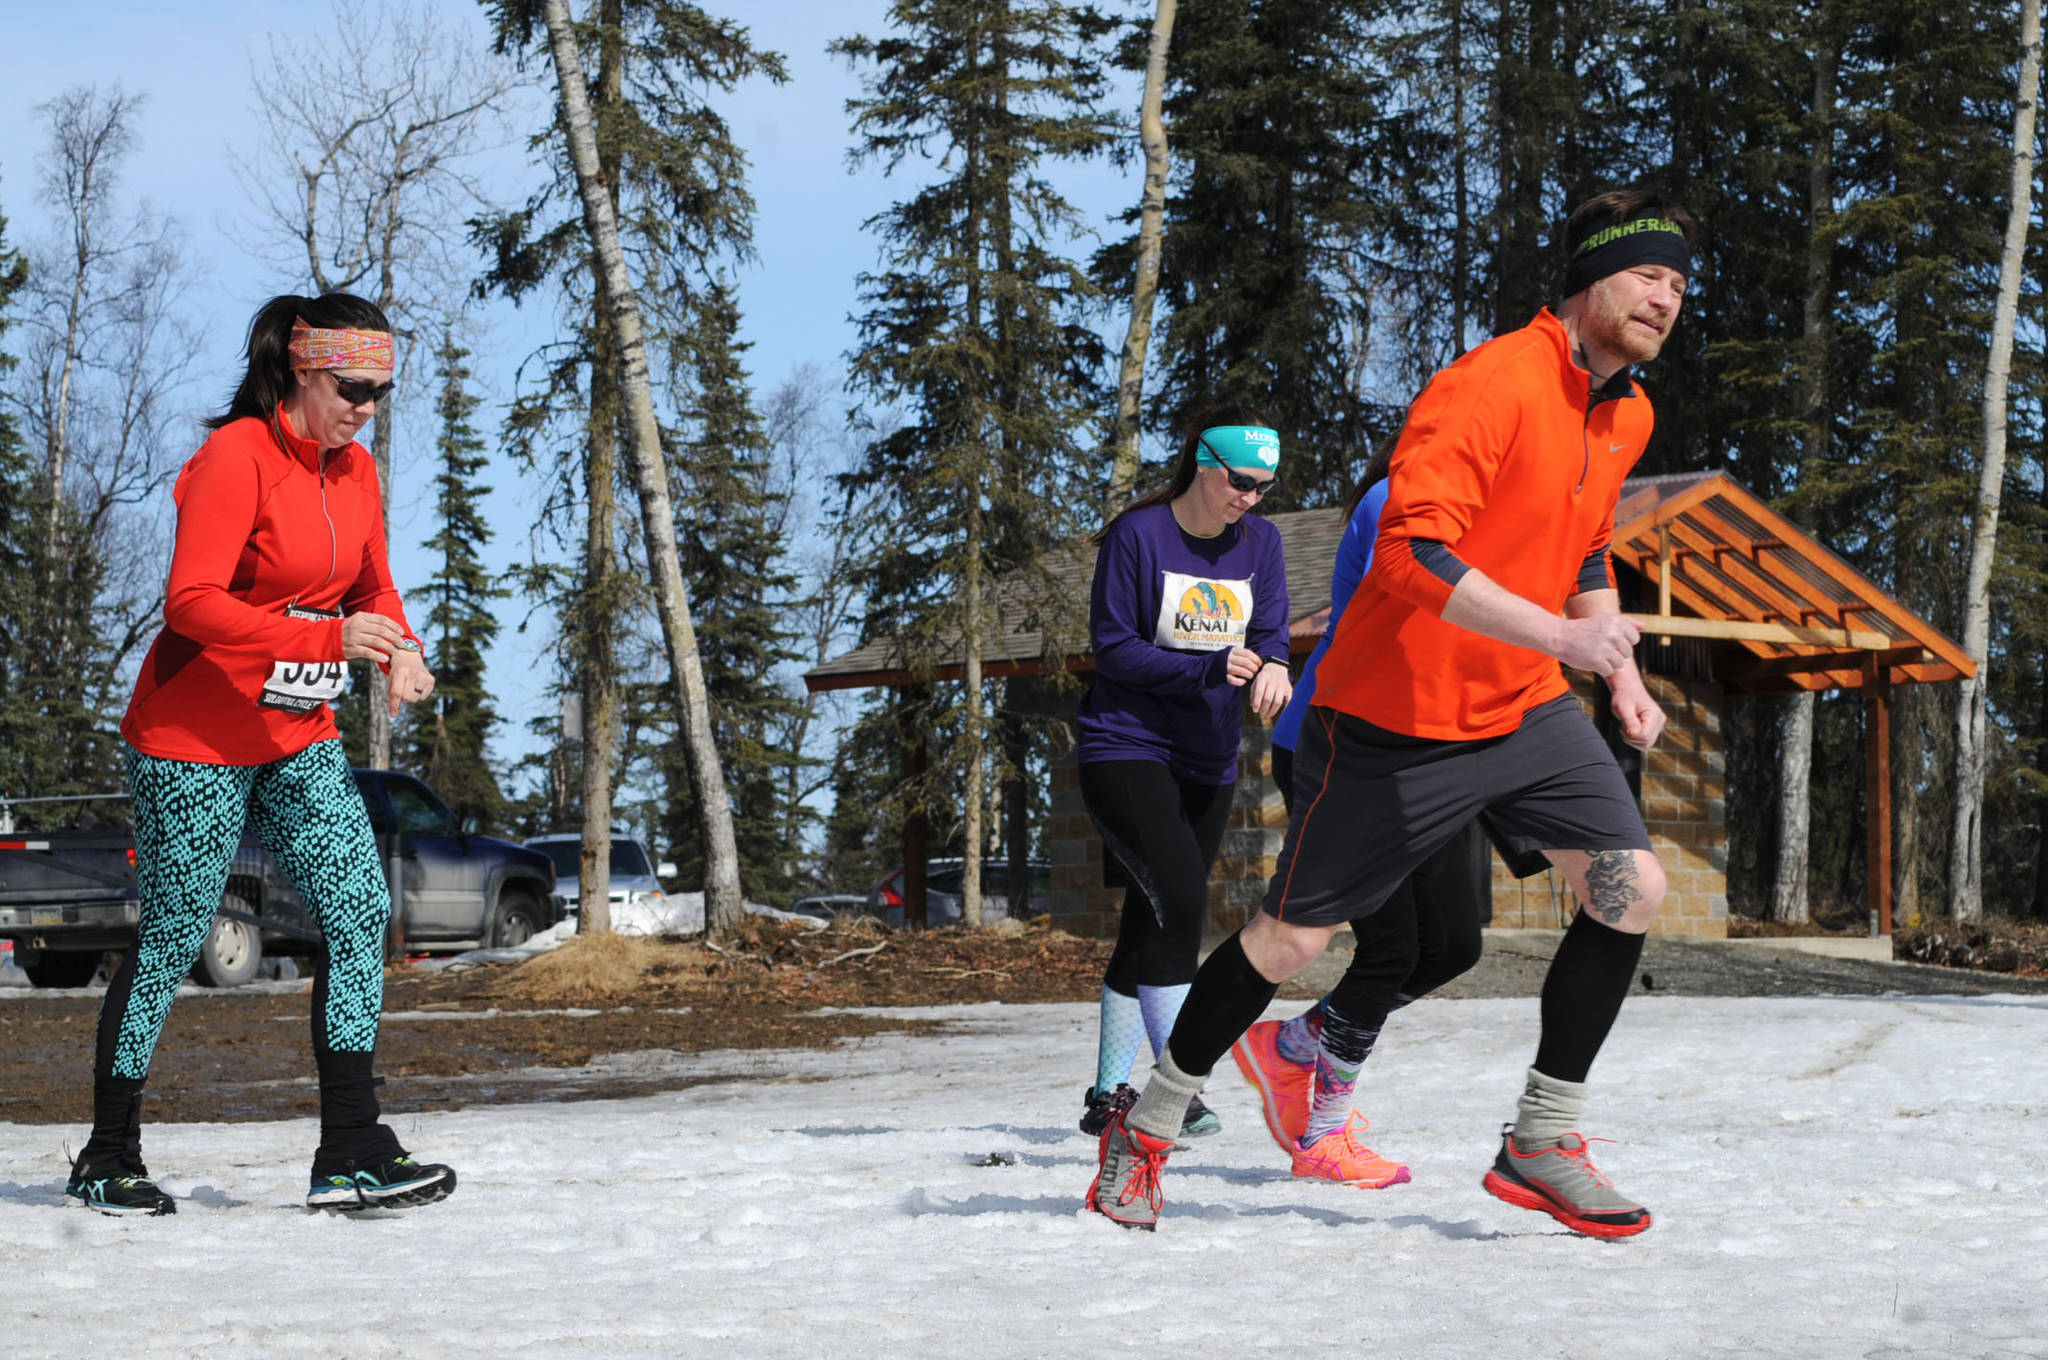 Runners take off on the Wolverine Trail at the start of the 2018 Choose Your Weapon race at Tsalteshi Trails on Sunday, April 15, 2018 in Soldotna, Alaska. Racers completed two 5-kilometer laps around the lower trails by running, biking or skiing, with the option of switching between laps for extra points. Most of the trails had some snow with patches of wet mud sprinkled throughout as spring temperatures begin to dominate the central Kenai Peninsula. (Photo by Elizabeth Earl/Peninsula Clarion)